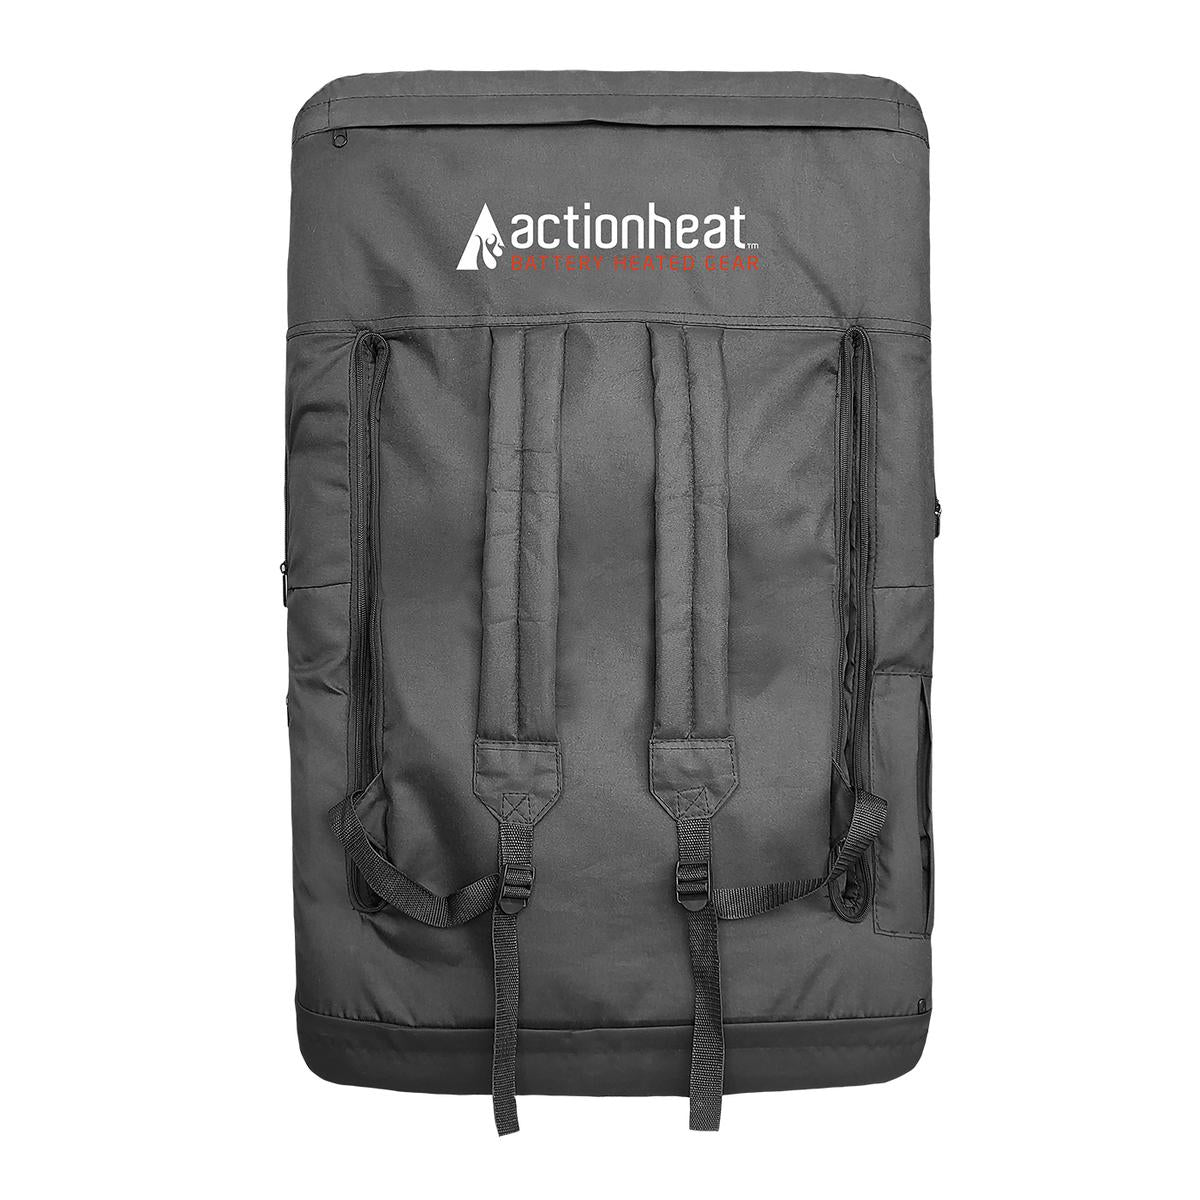 ActionHeat 5V Heated Folding Bleacher Seat - The Warming Store